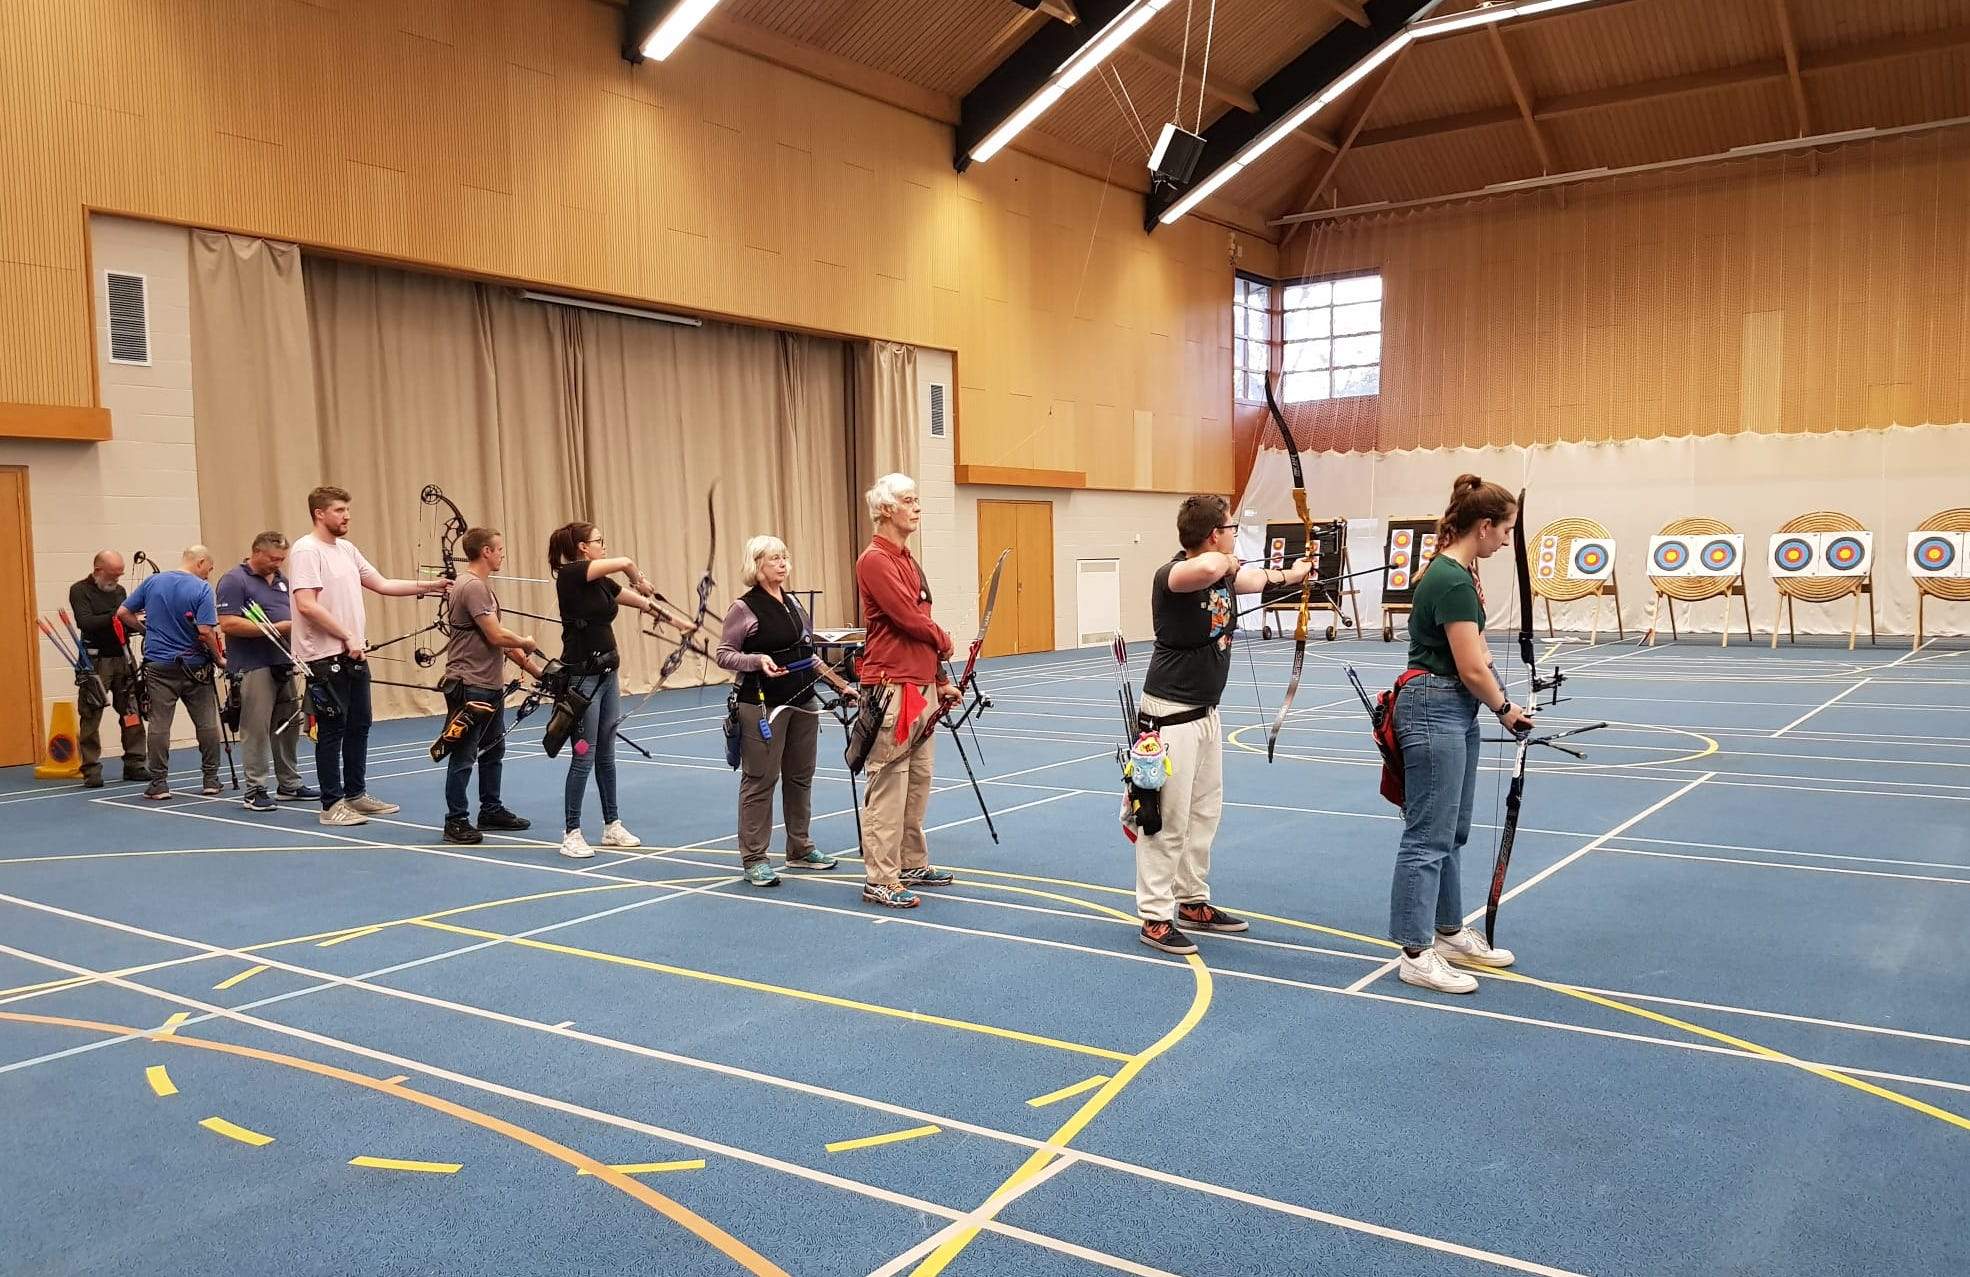 Indoor archery at King’s Centre now on Wednesdays